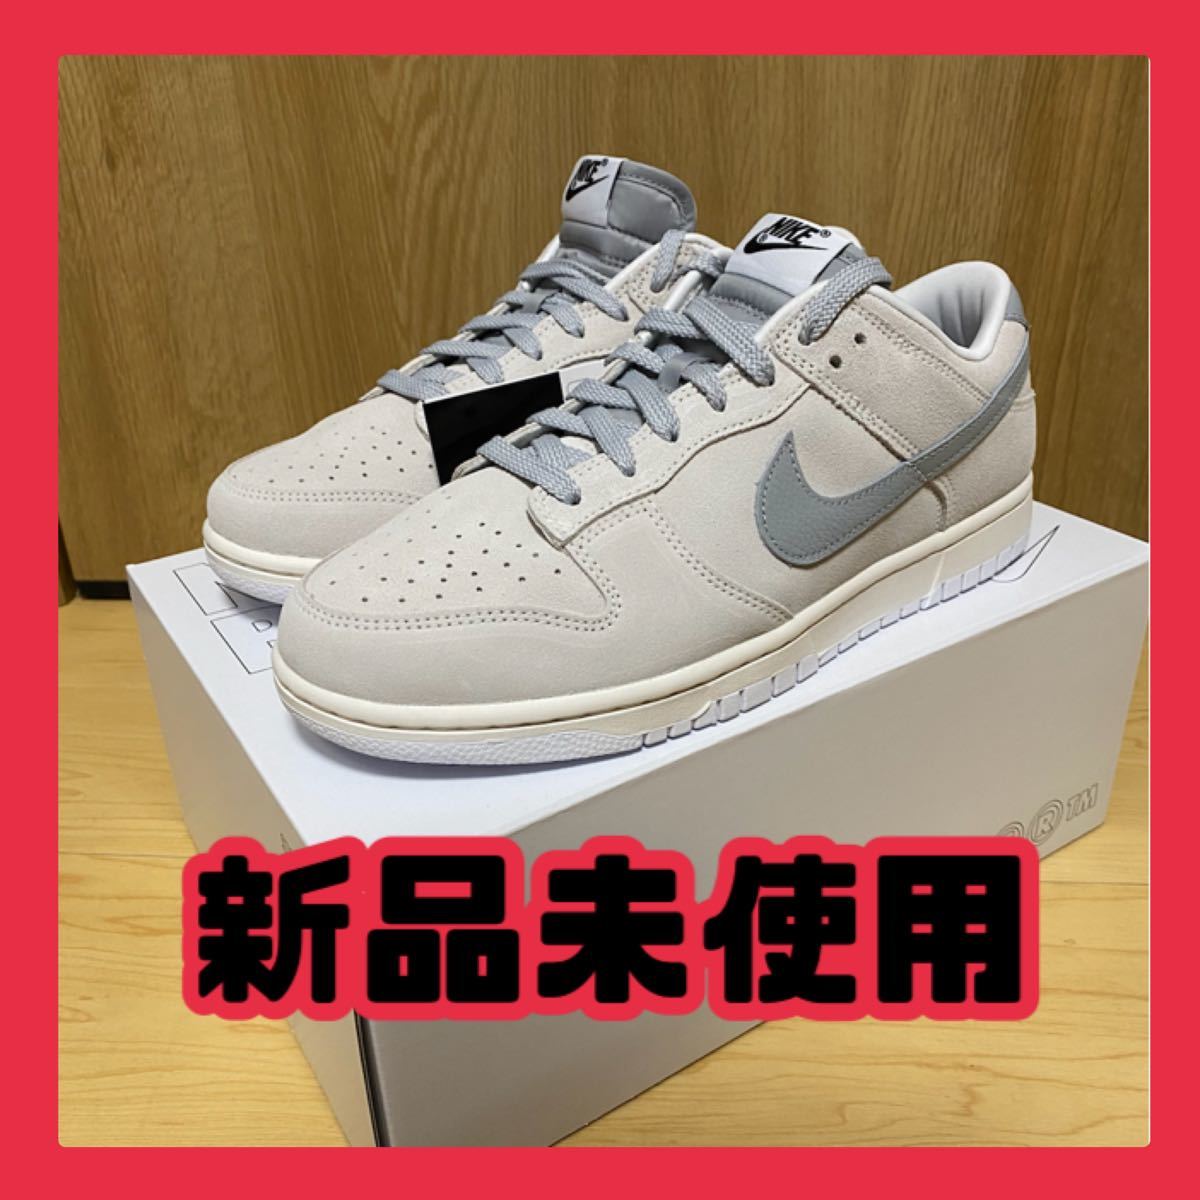 Nike Dunk Low by you スエード ナイキ ダンク ロー 27cm｜Yahoo